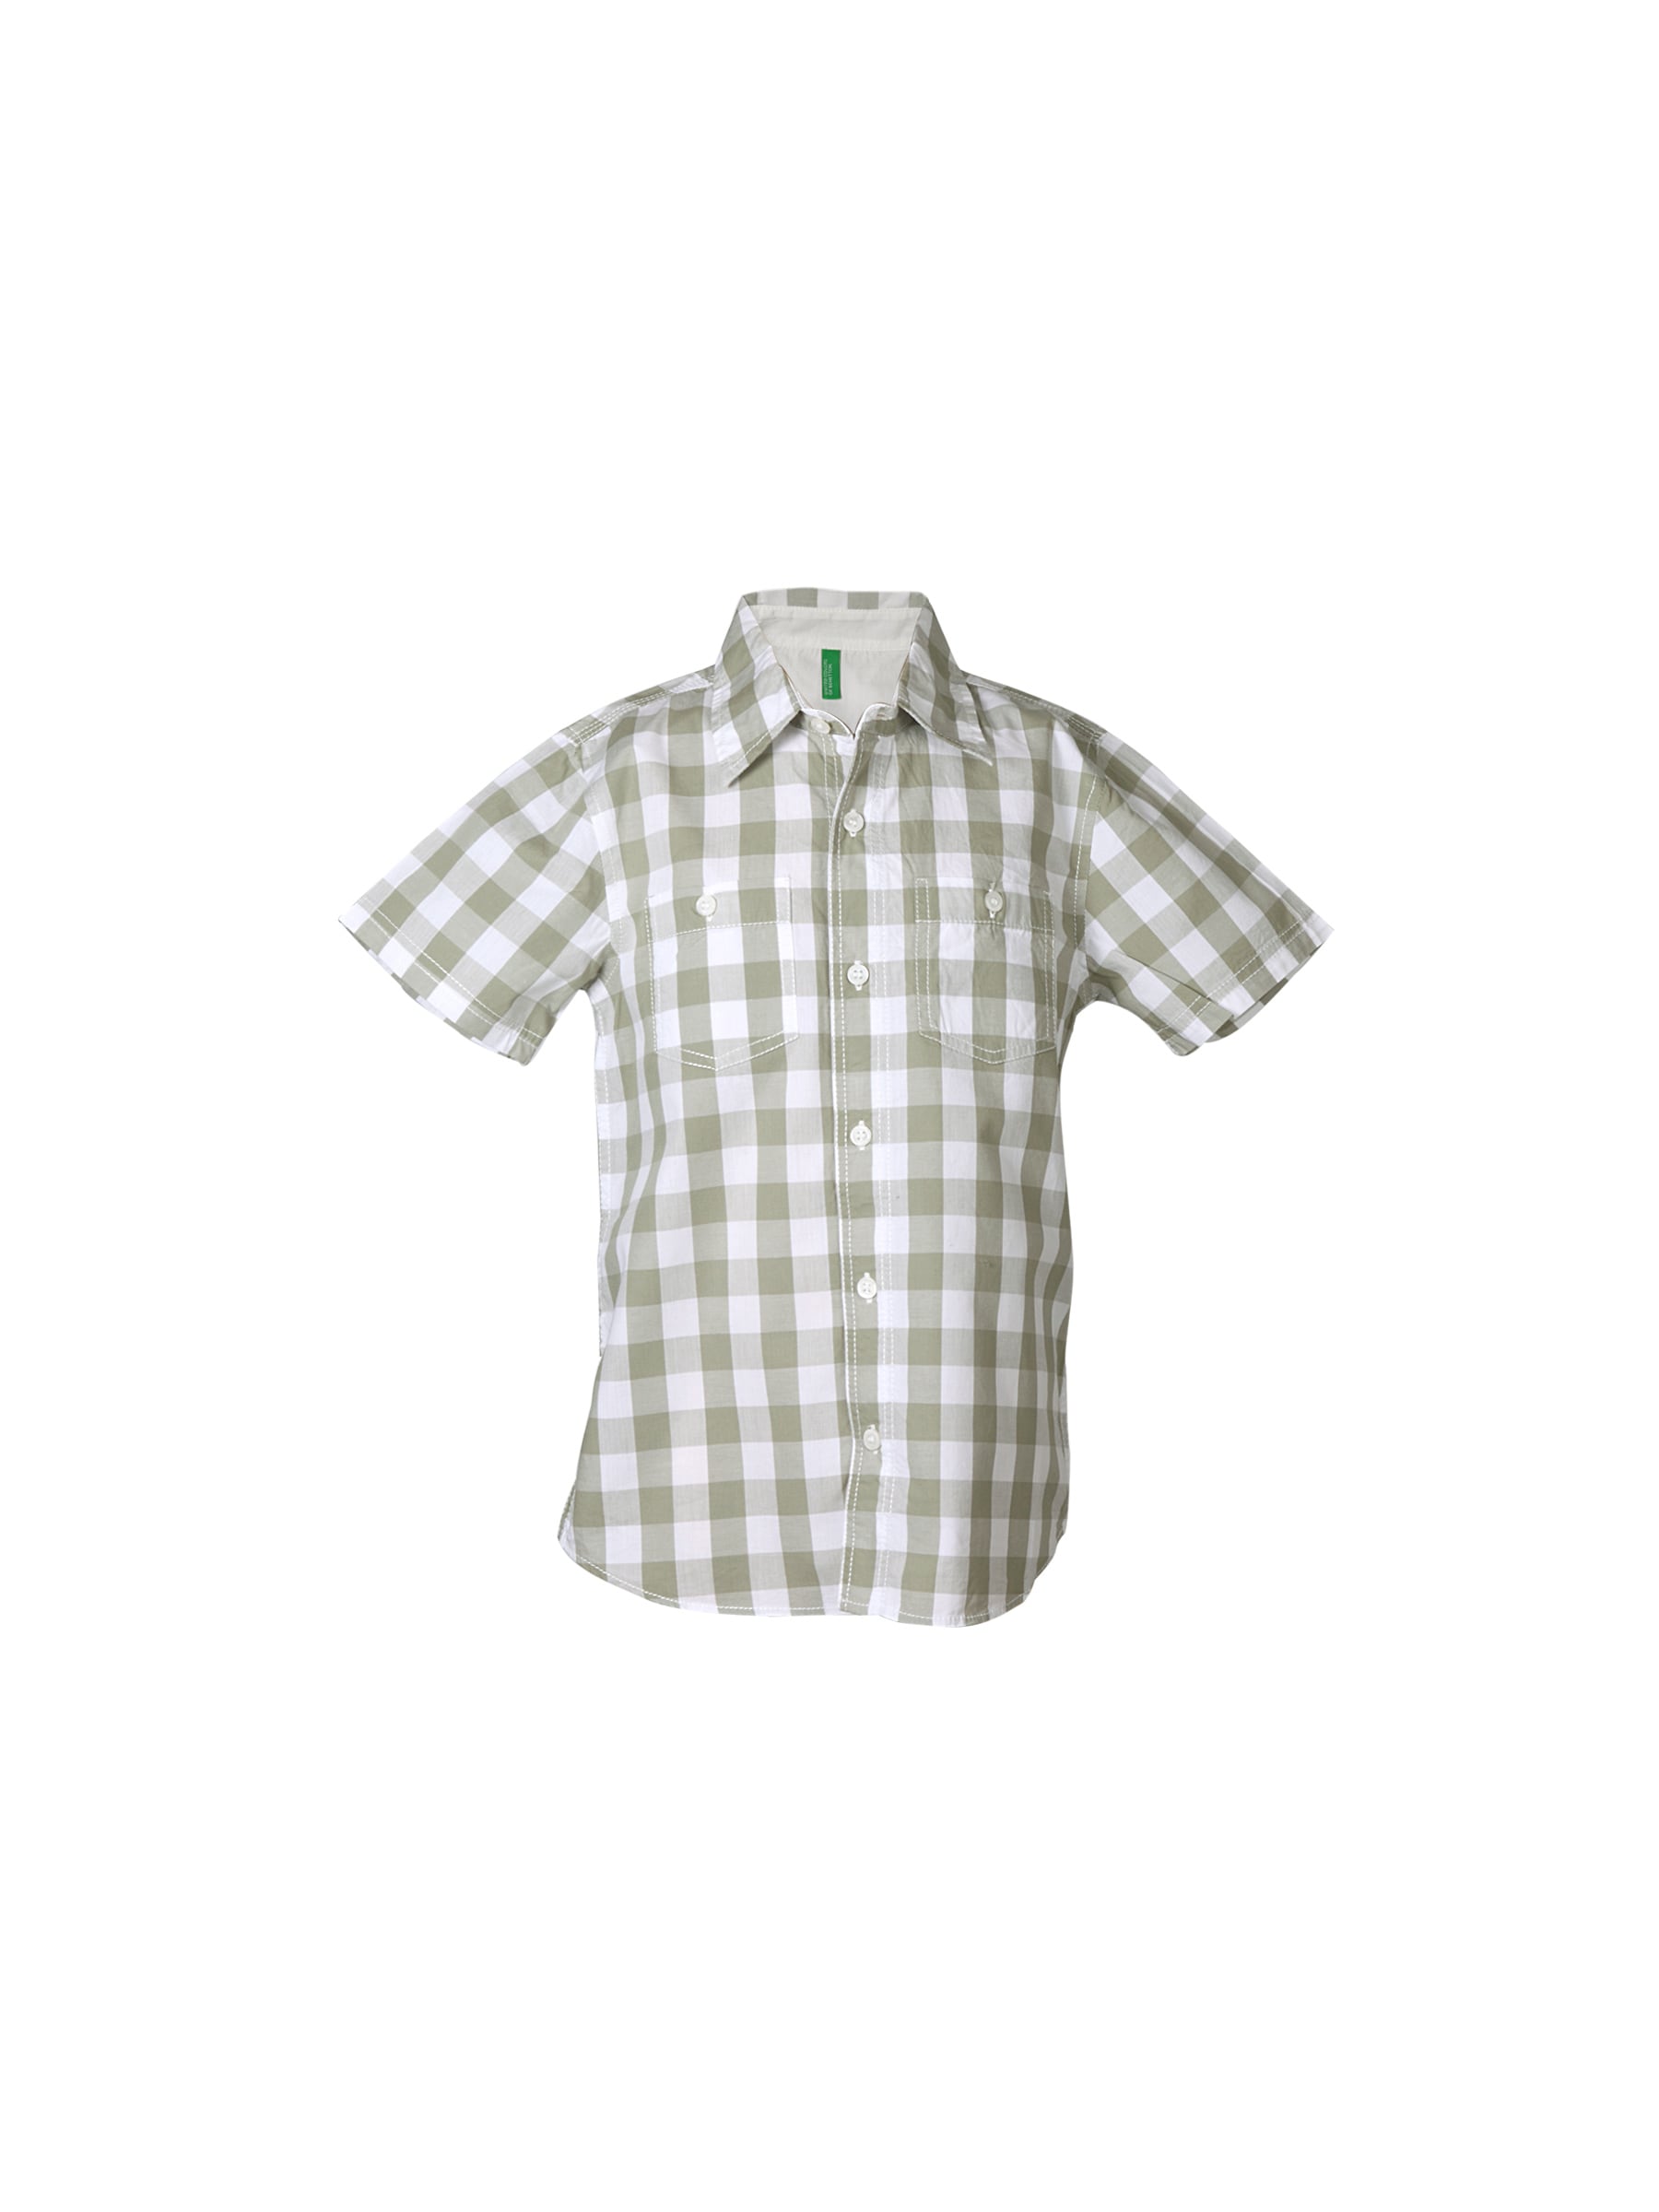 United Colors of Benetton Boys Check Olive Shirt